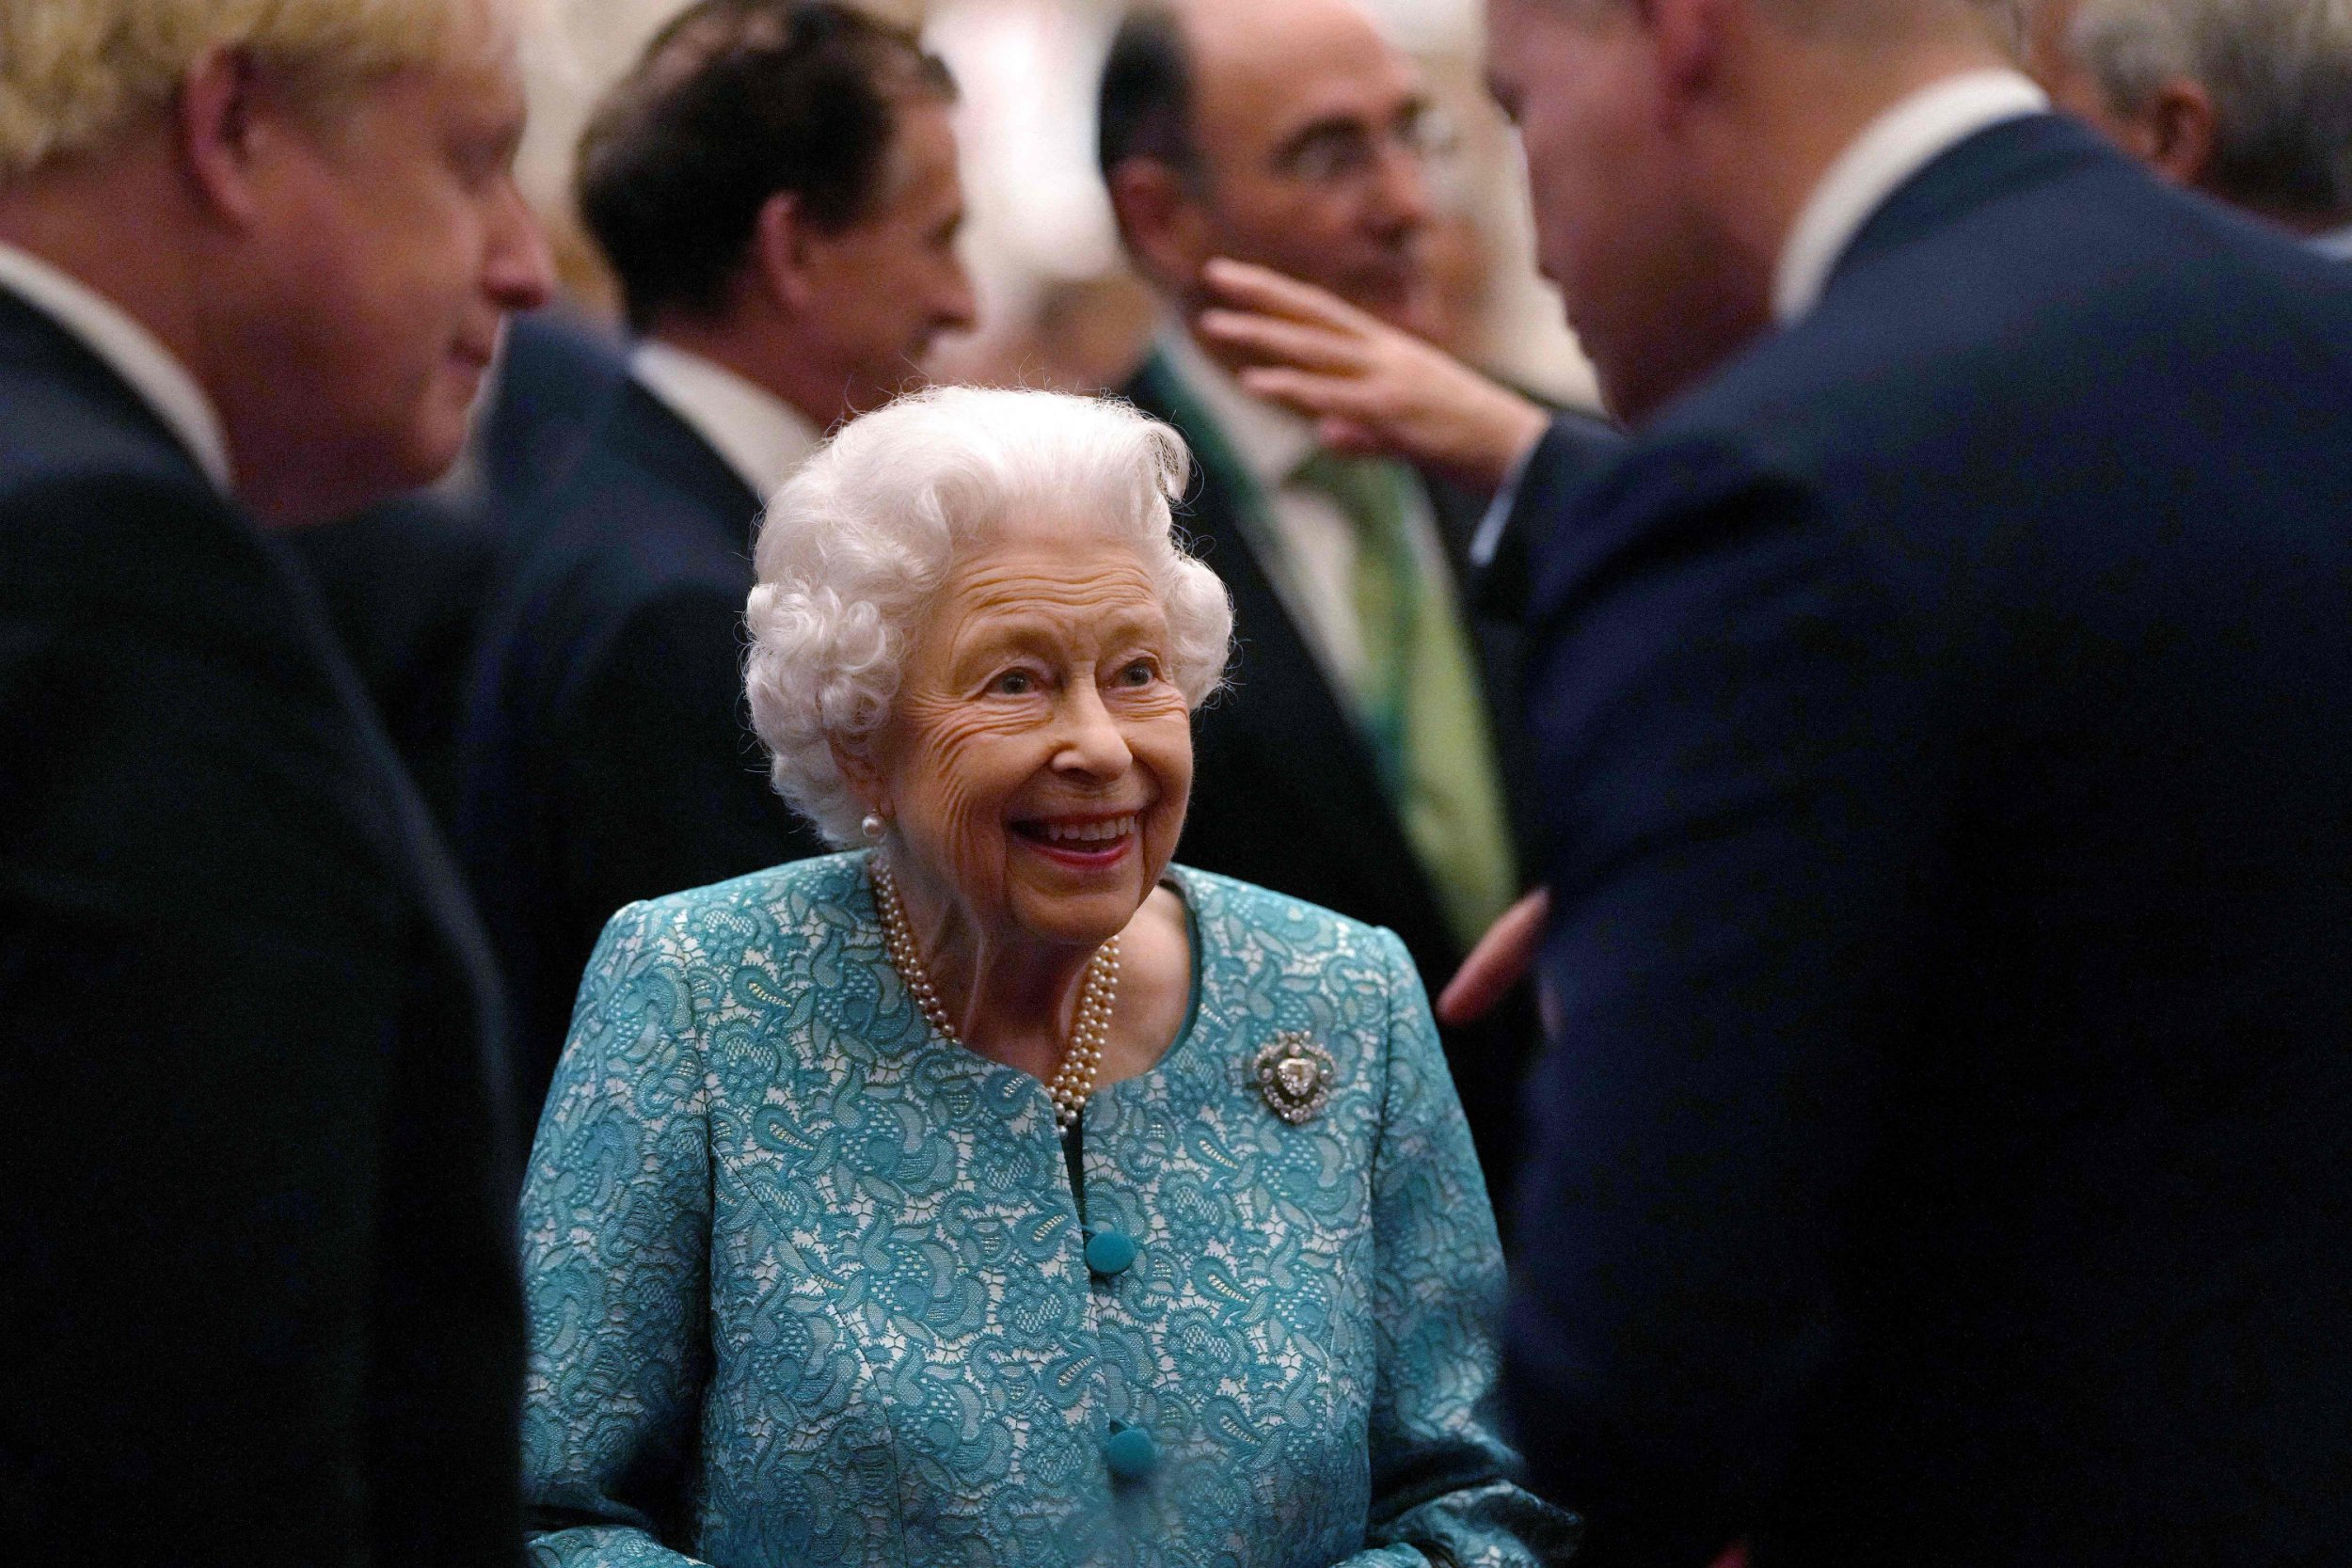 The Queen as Britain's top diplomat will be sorely missed by Boris Johnson at COP26